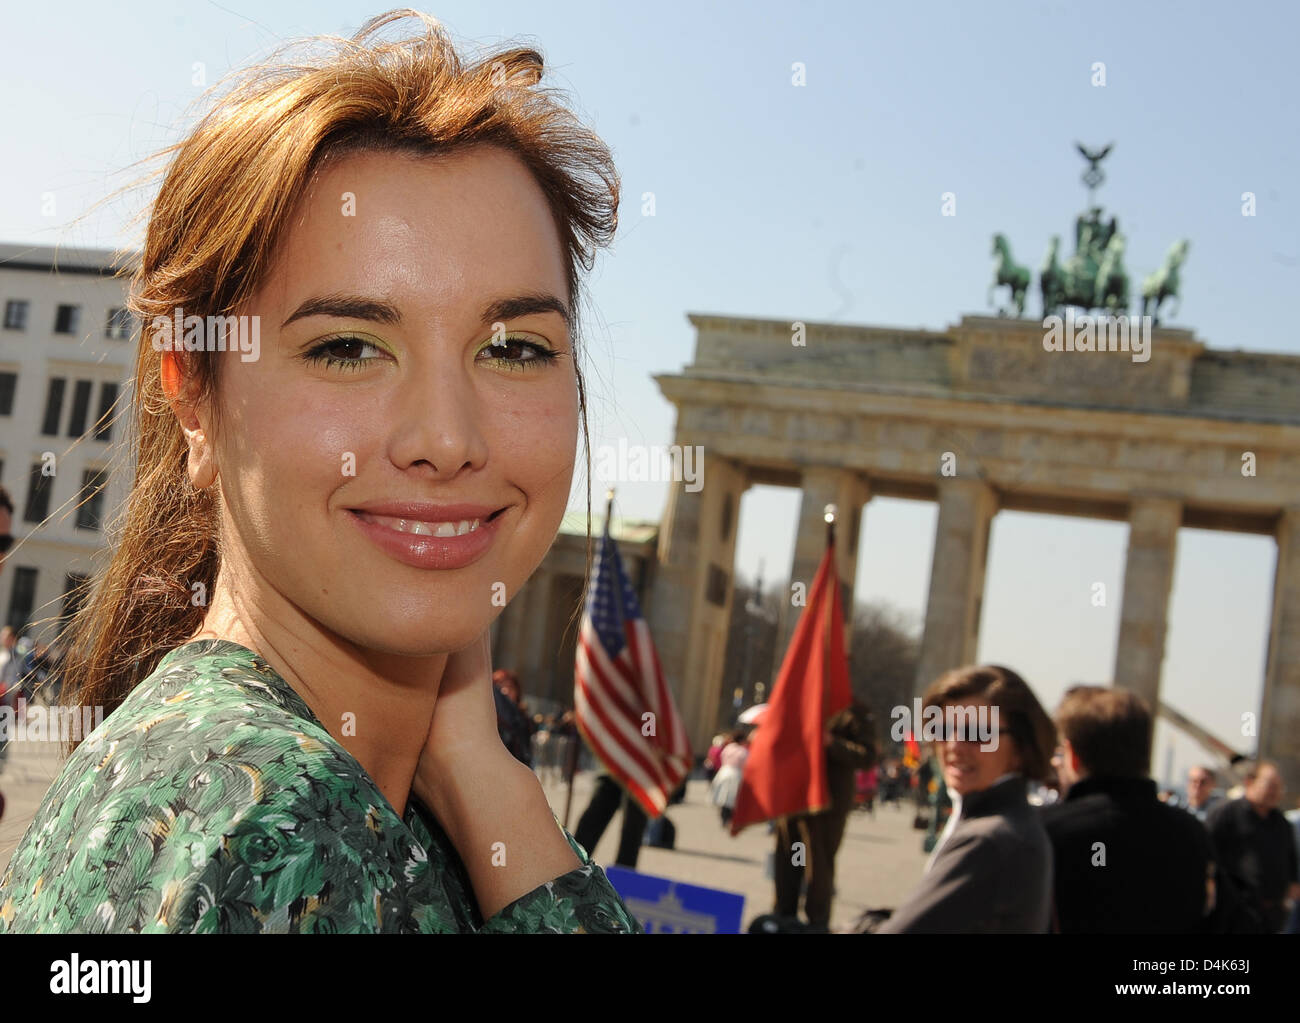 Croatian singer Nives Celsius, wife of German Bundesliga club SC Karlsruhe?s Dino Drpic, poses at Brandenburg Gate in Berlin, Germany, 03 April 2009. Celsius is featured on the cover of FHM Germany?s May 2009 issue. Photo: Jens Kalaene Stock Photo